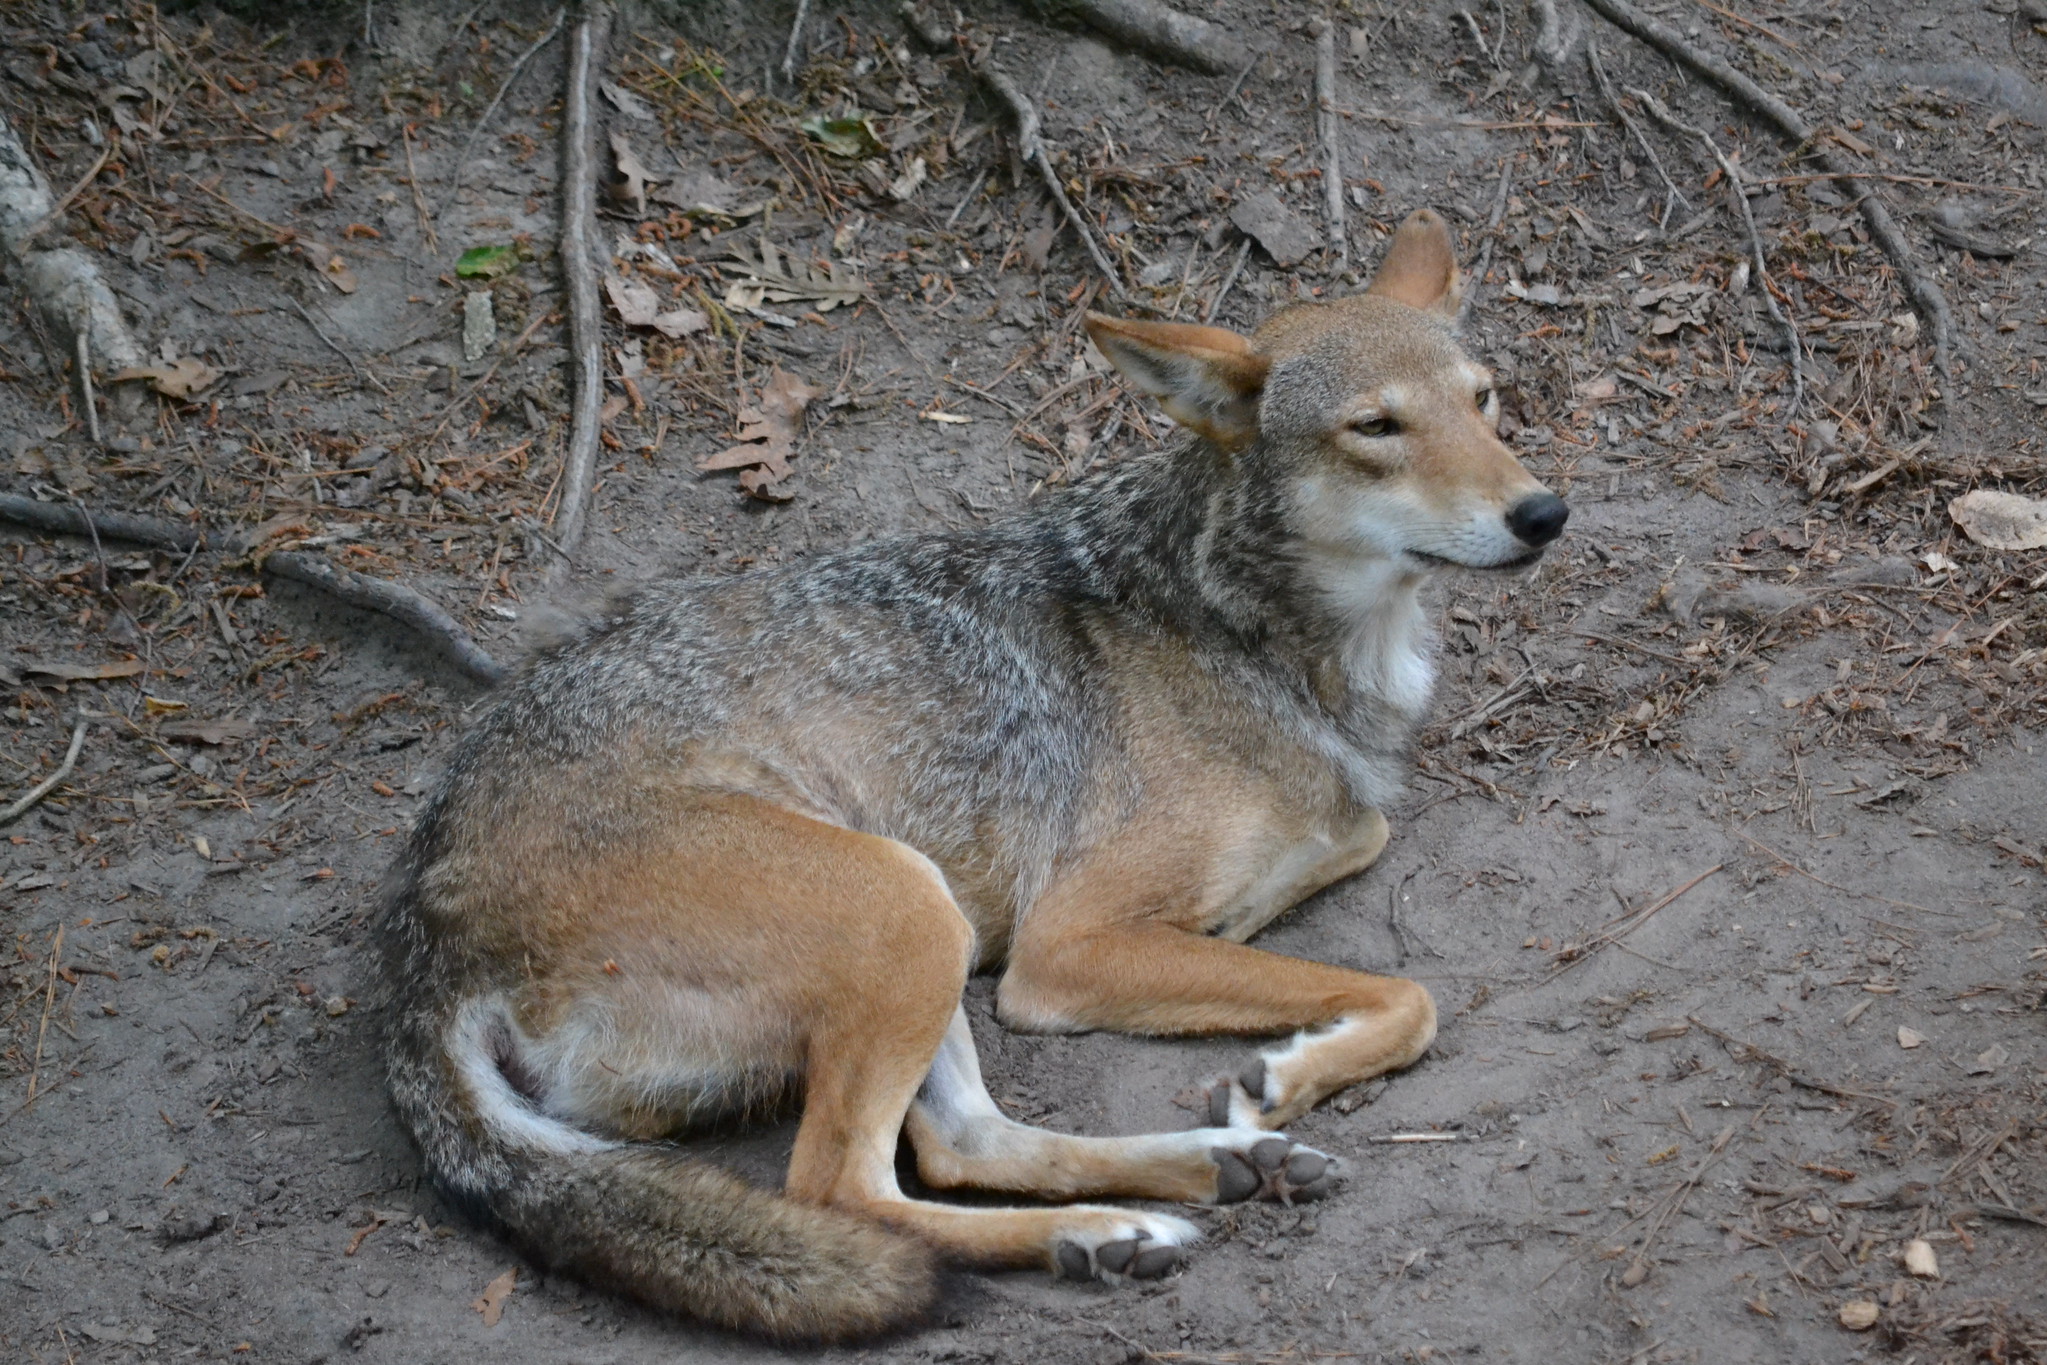 A Red Wolf which may soon disappear by merging with coyotes. To confuse matters, Red Wolves might be a hybrid between gray wolves and coyotes long ago.